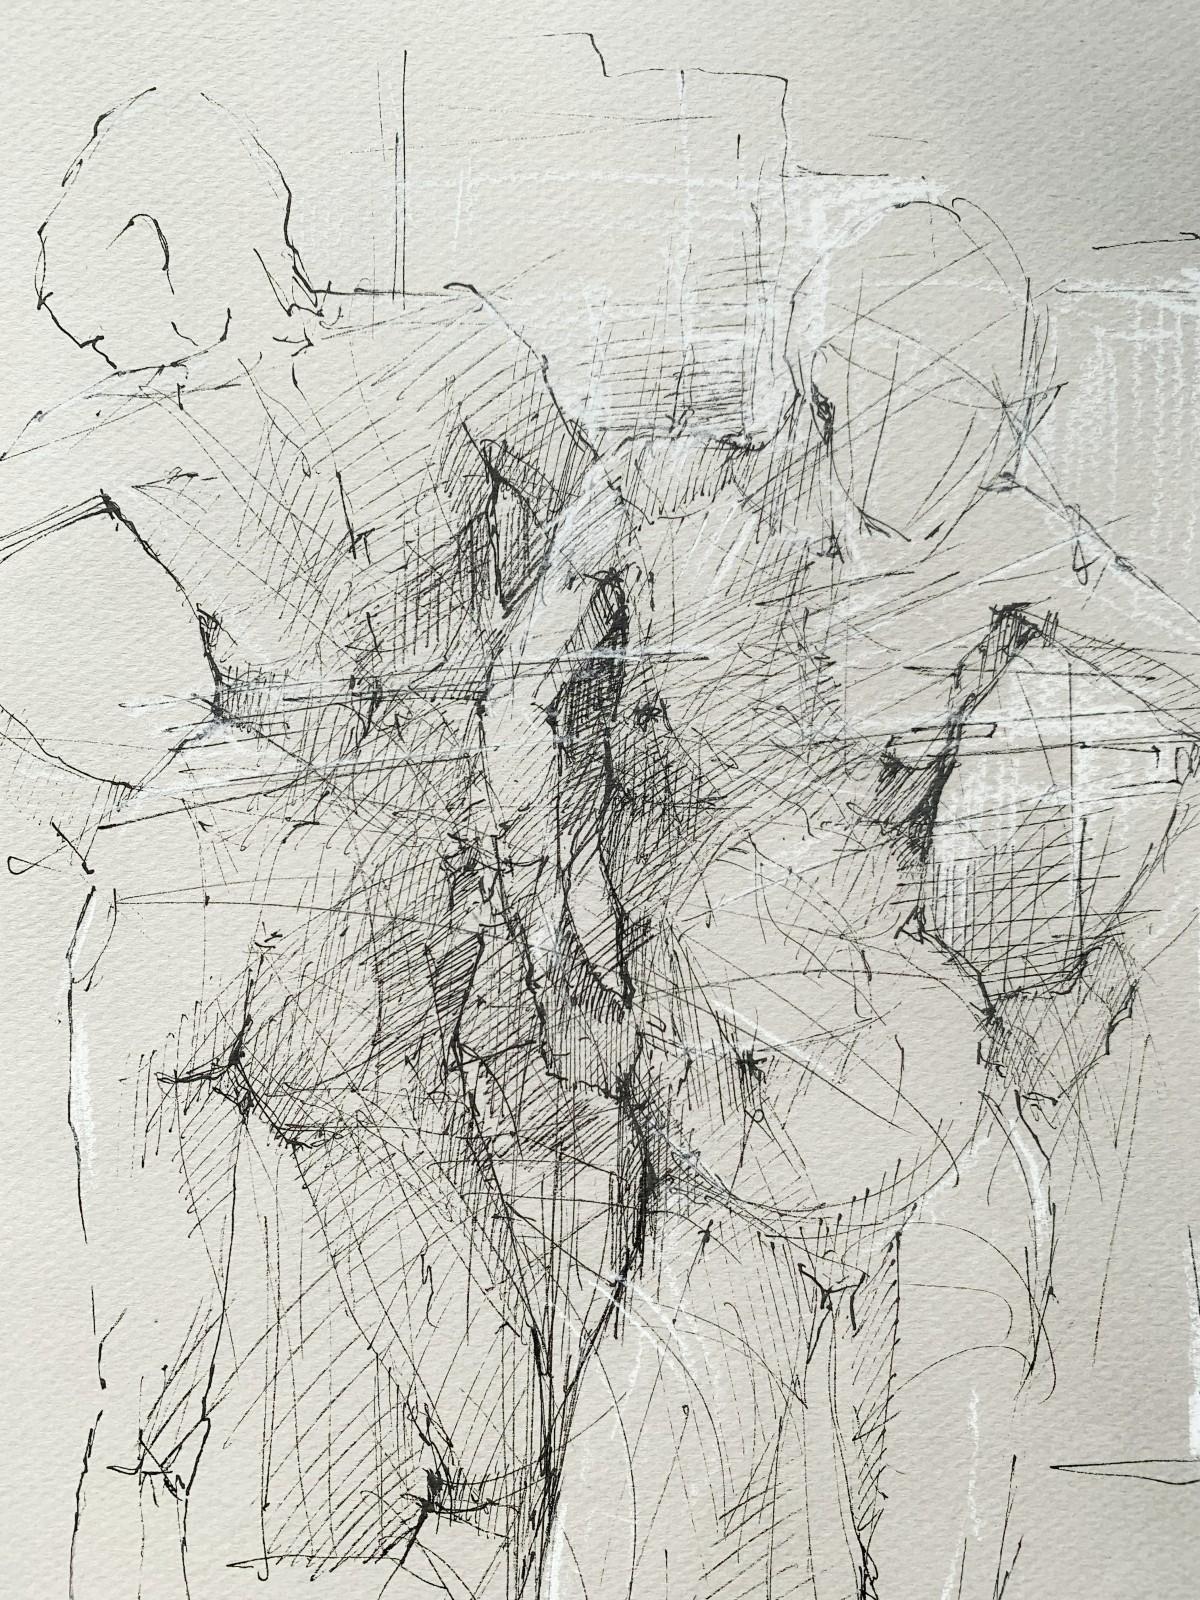 Drawing on paper

MICHAL BAJSAROWICZ (born in 1963)
He graduated from the Academy of Fine Arts in Poznan, achieving his diploma in 1992 at the studio of prof. B. Wegner. His mainly works in painting, graphics and sculpture, and is a member of the